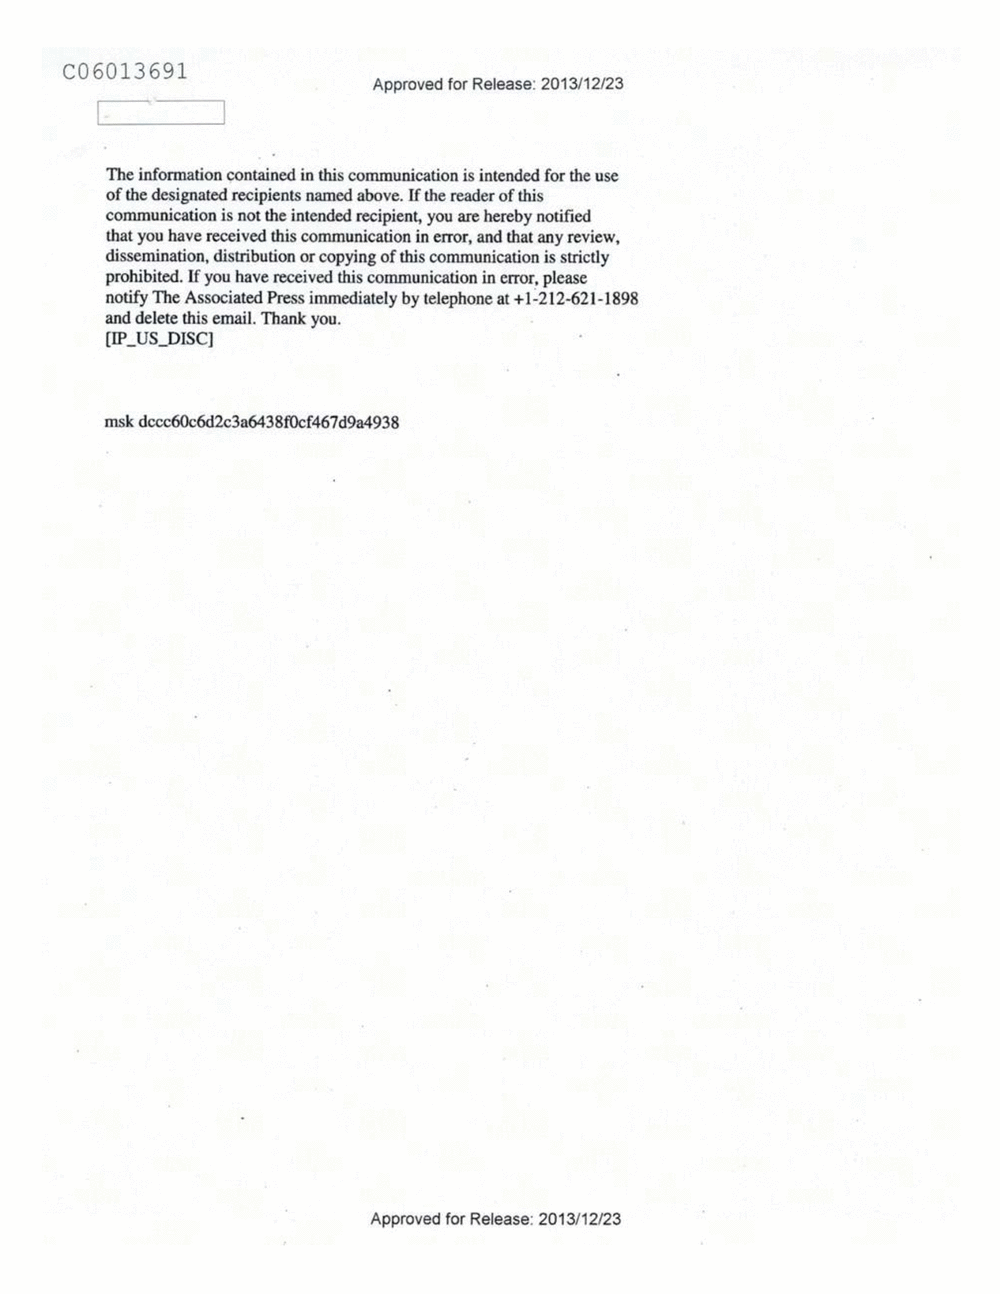 Page 551 from Email Correspondence Between Reporters and CIA Flacks